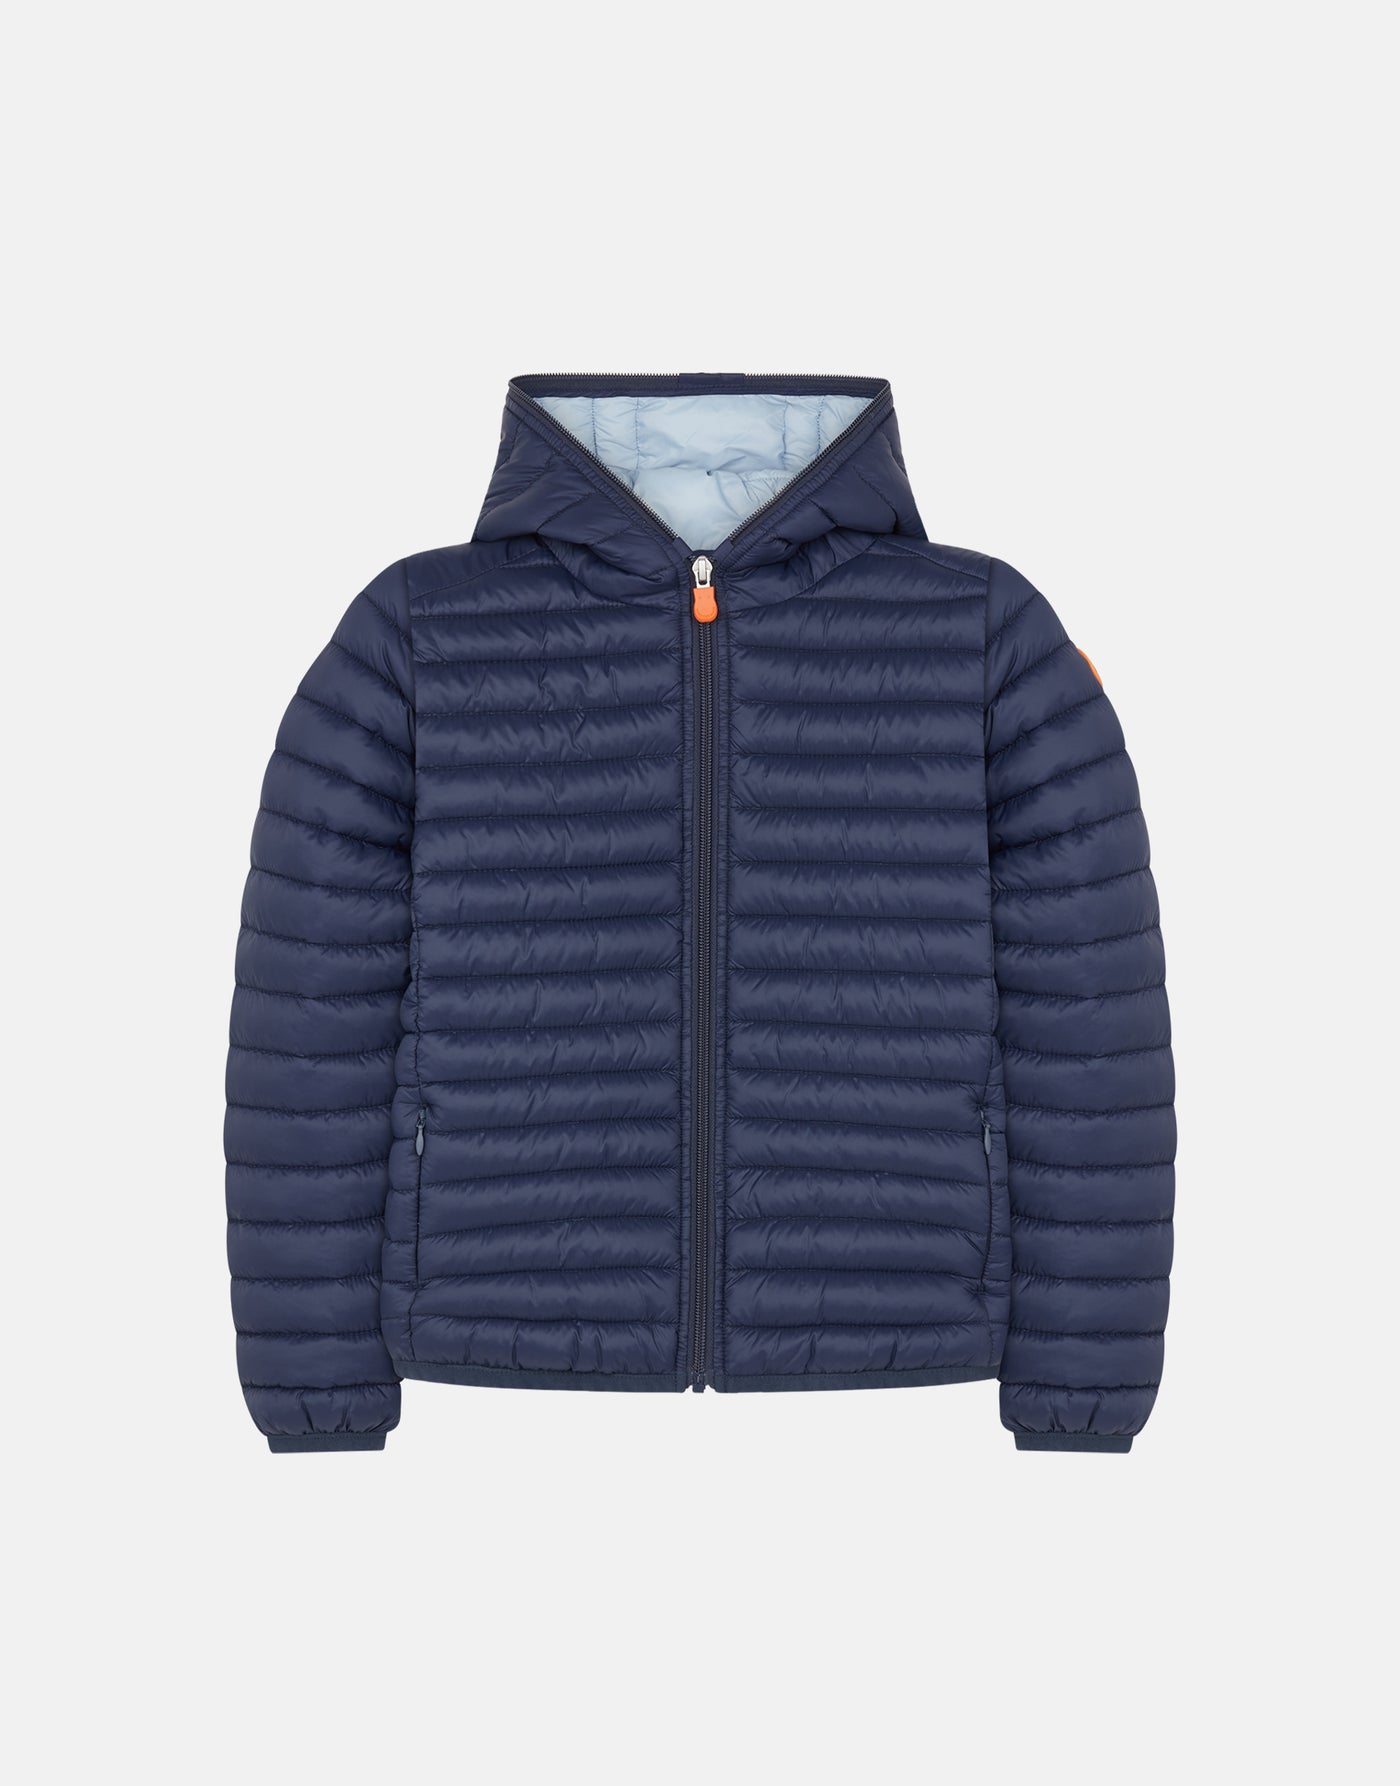 Front View of Girls' Lily Hooded Puffer Jacket in Navy Blue